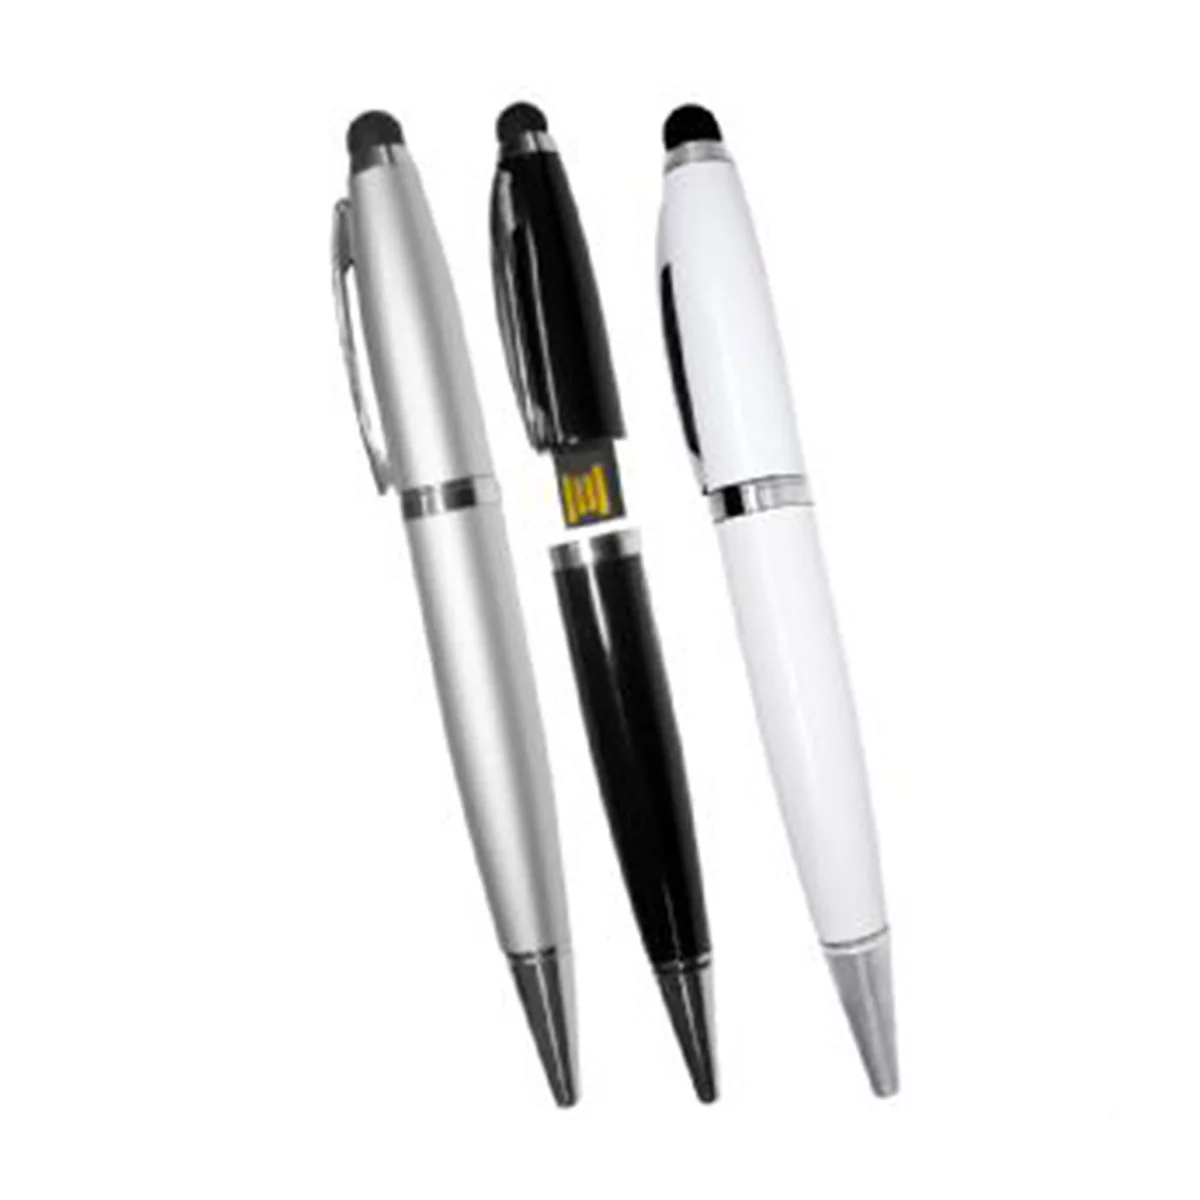 USB Flashdrive Pen with Stylus-Black, Silver and White.